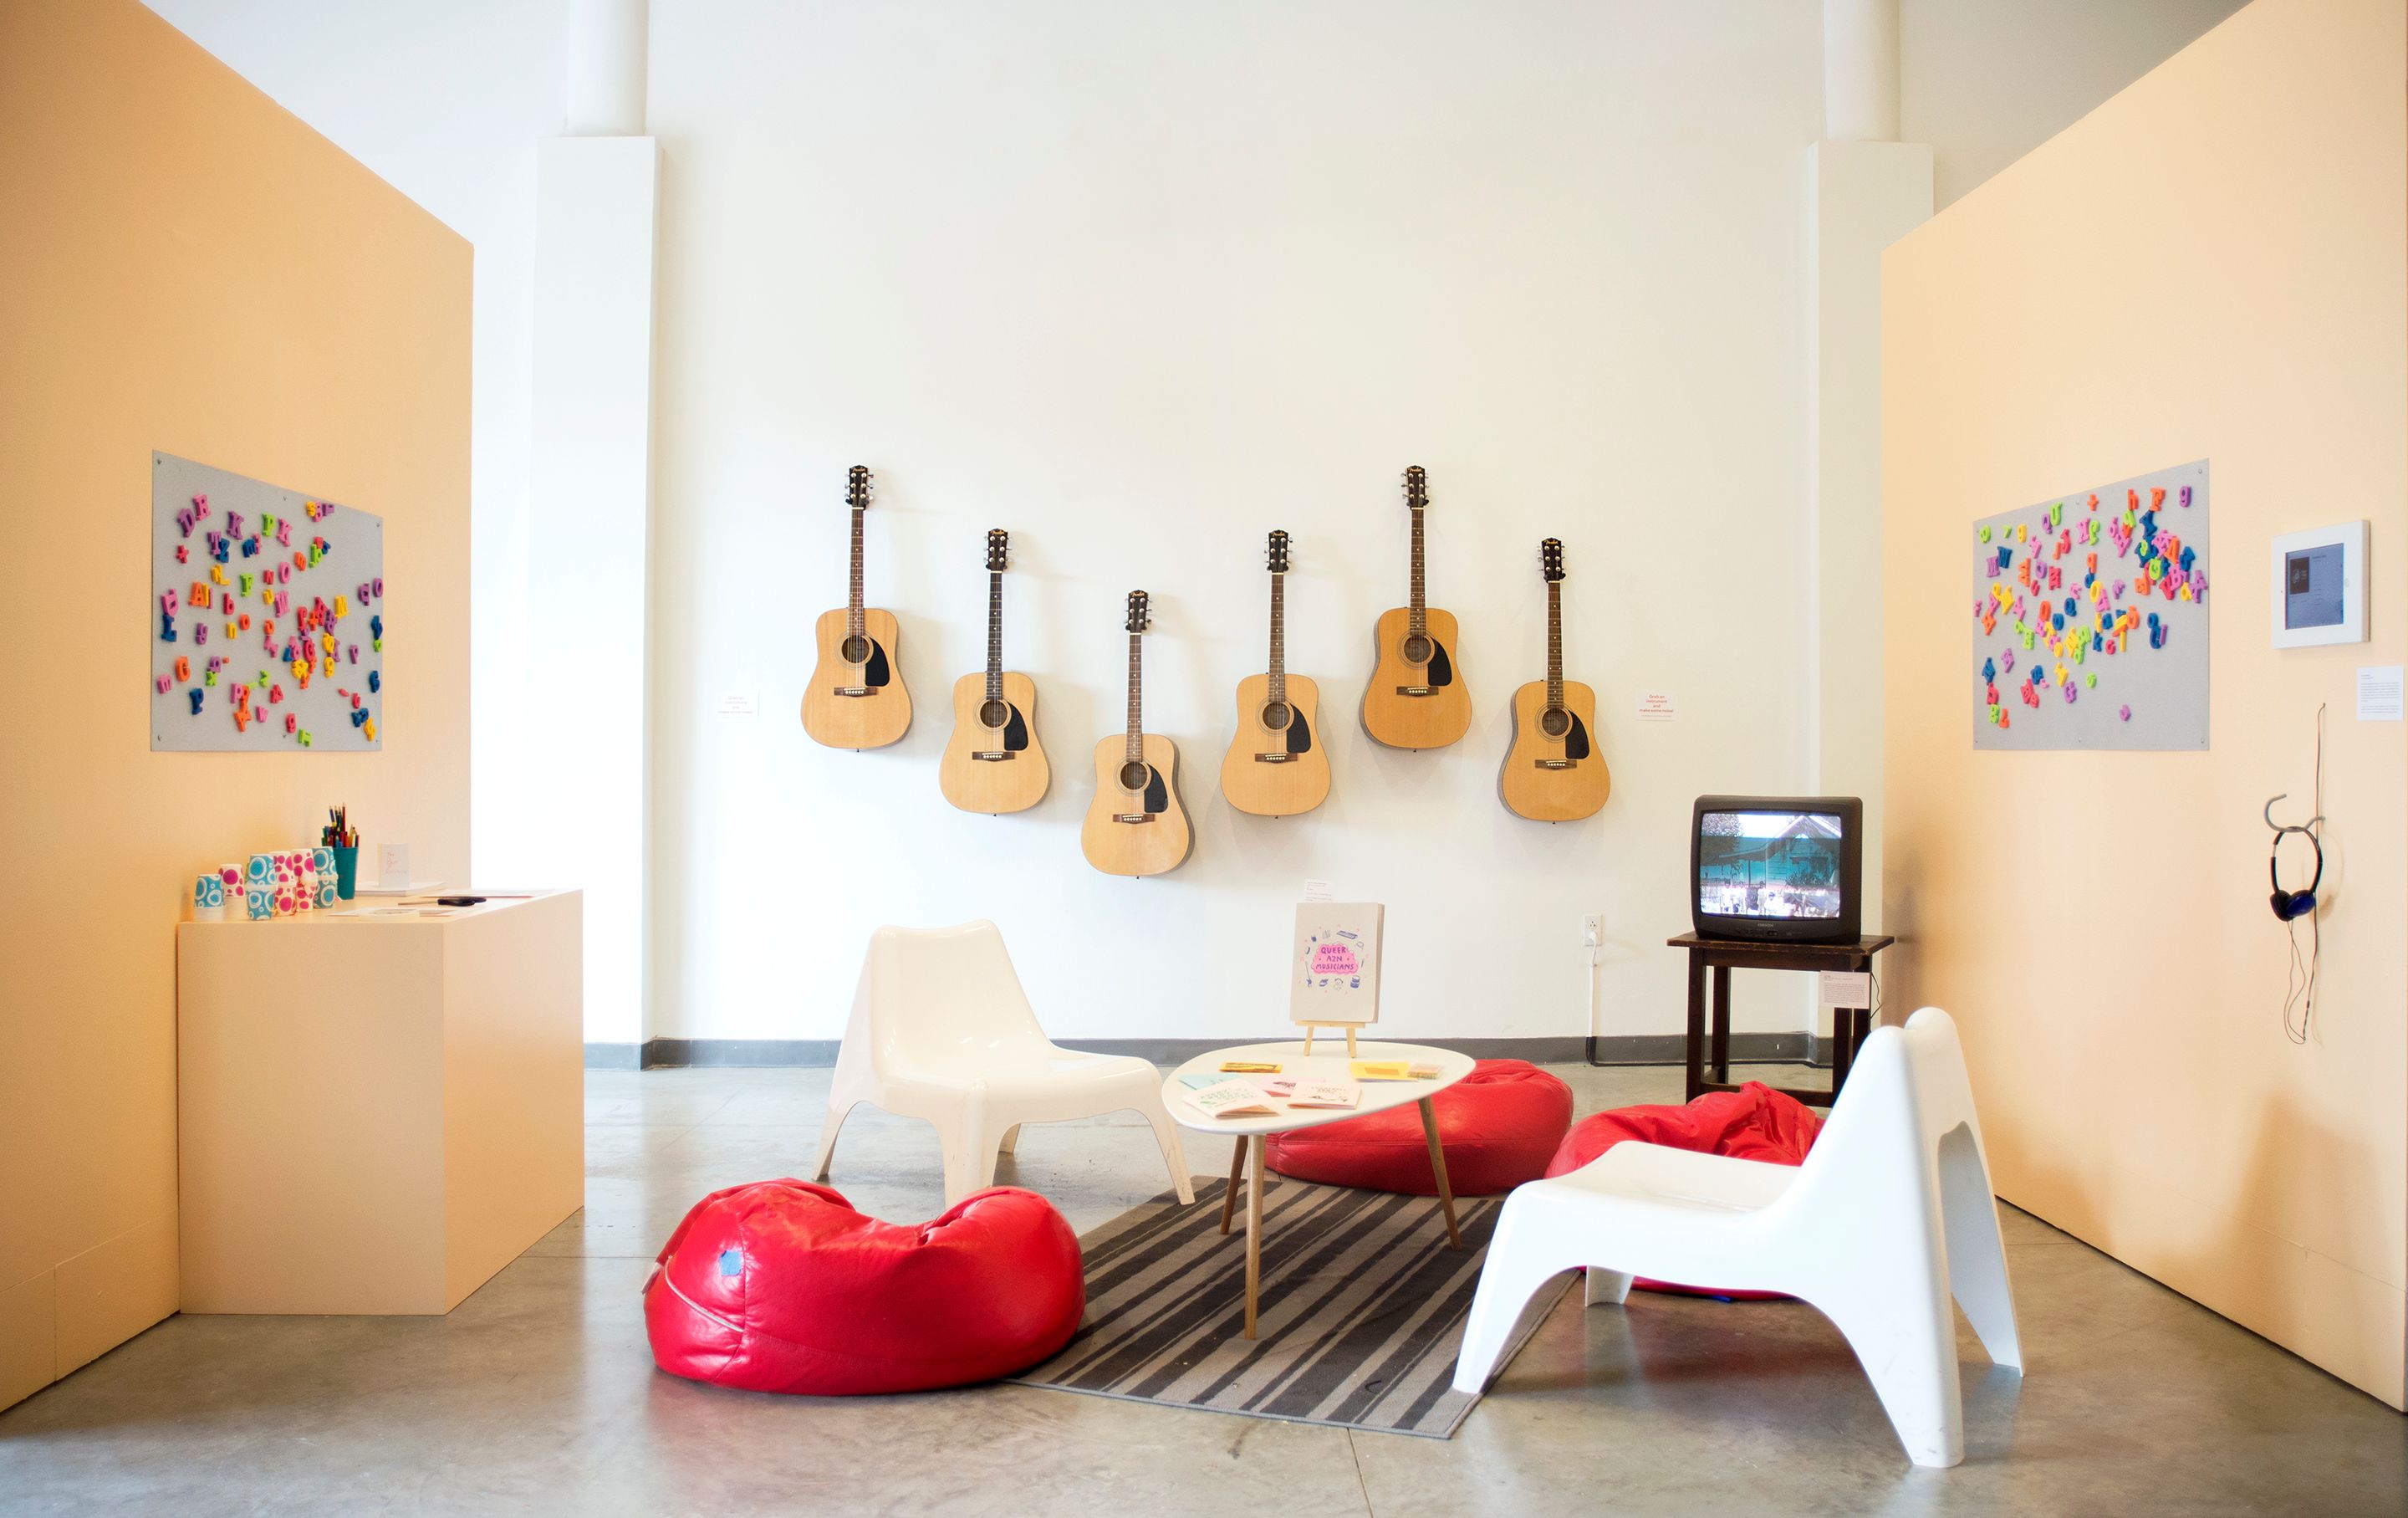 A row of guitars hanging on a wall in an exhibit.